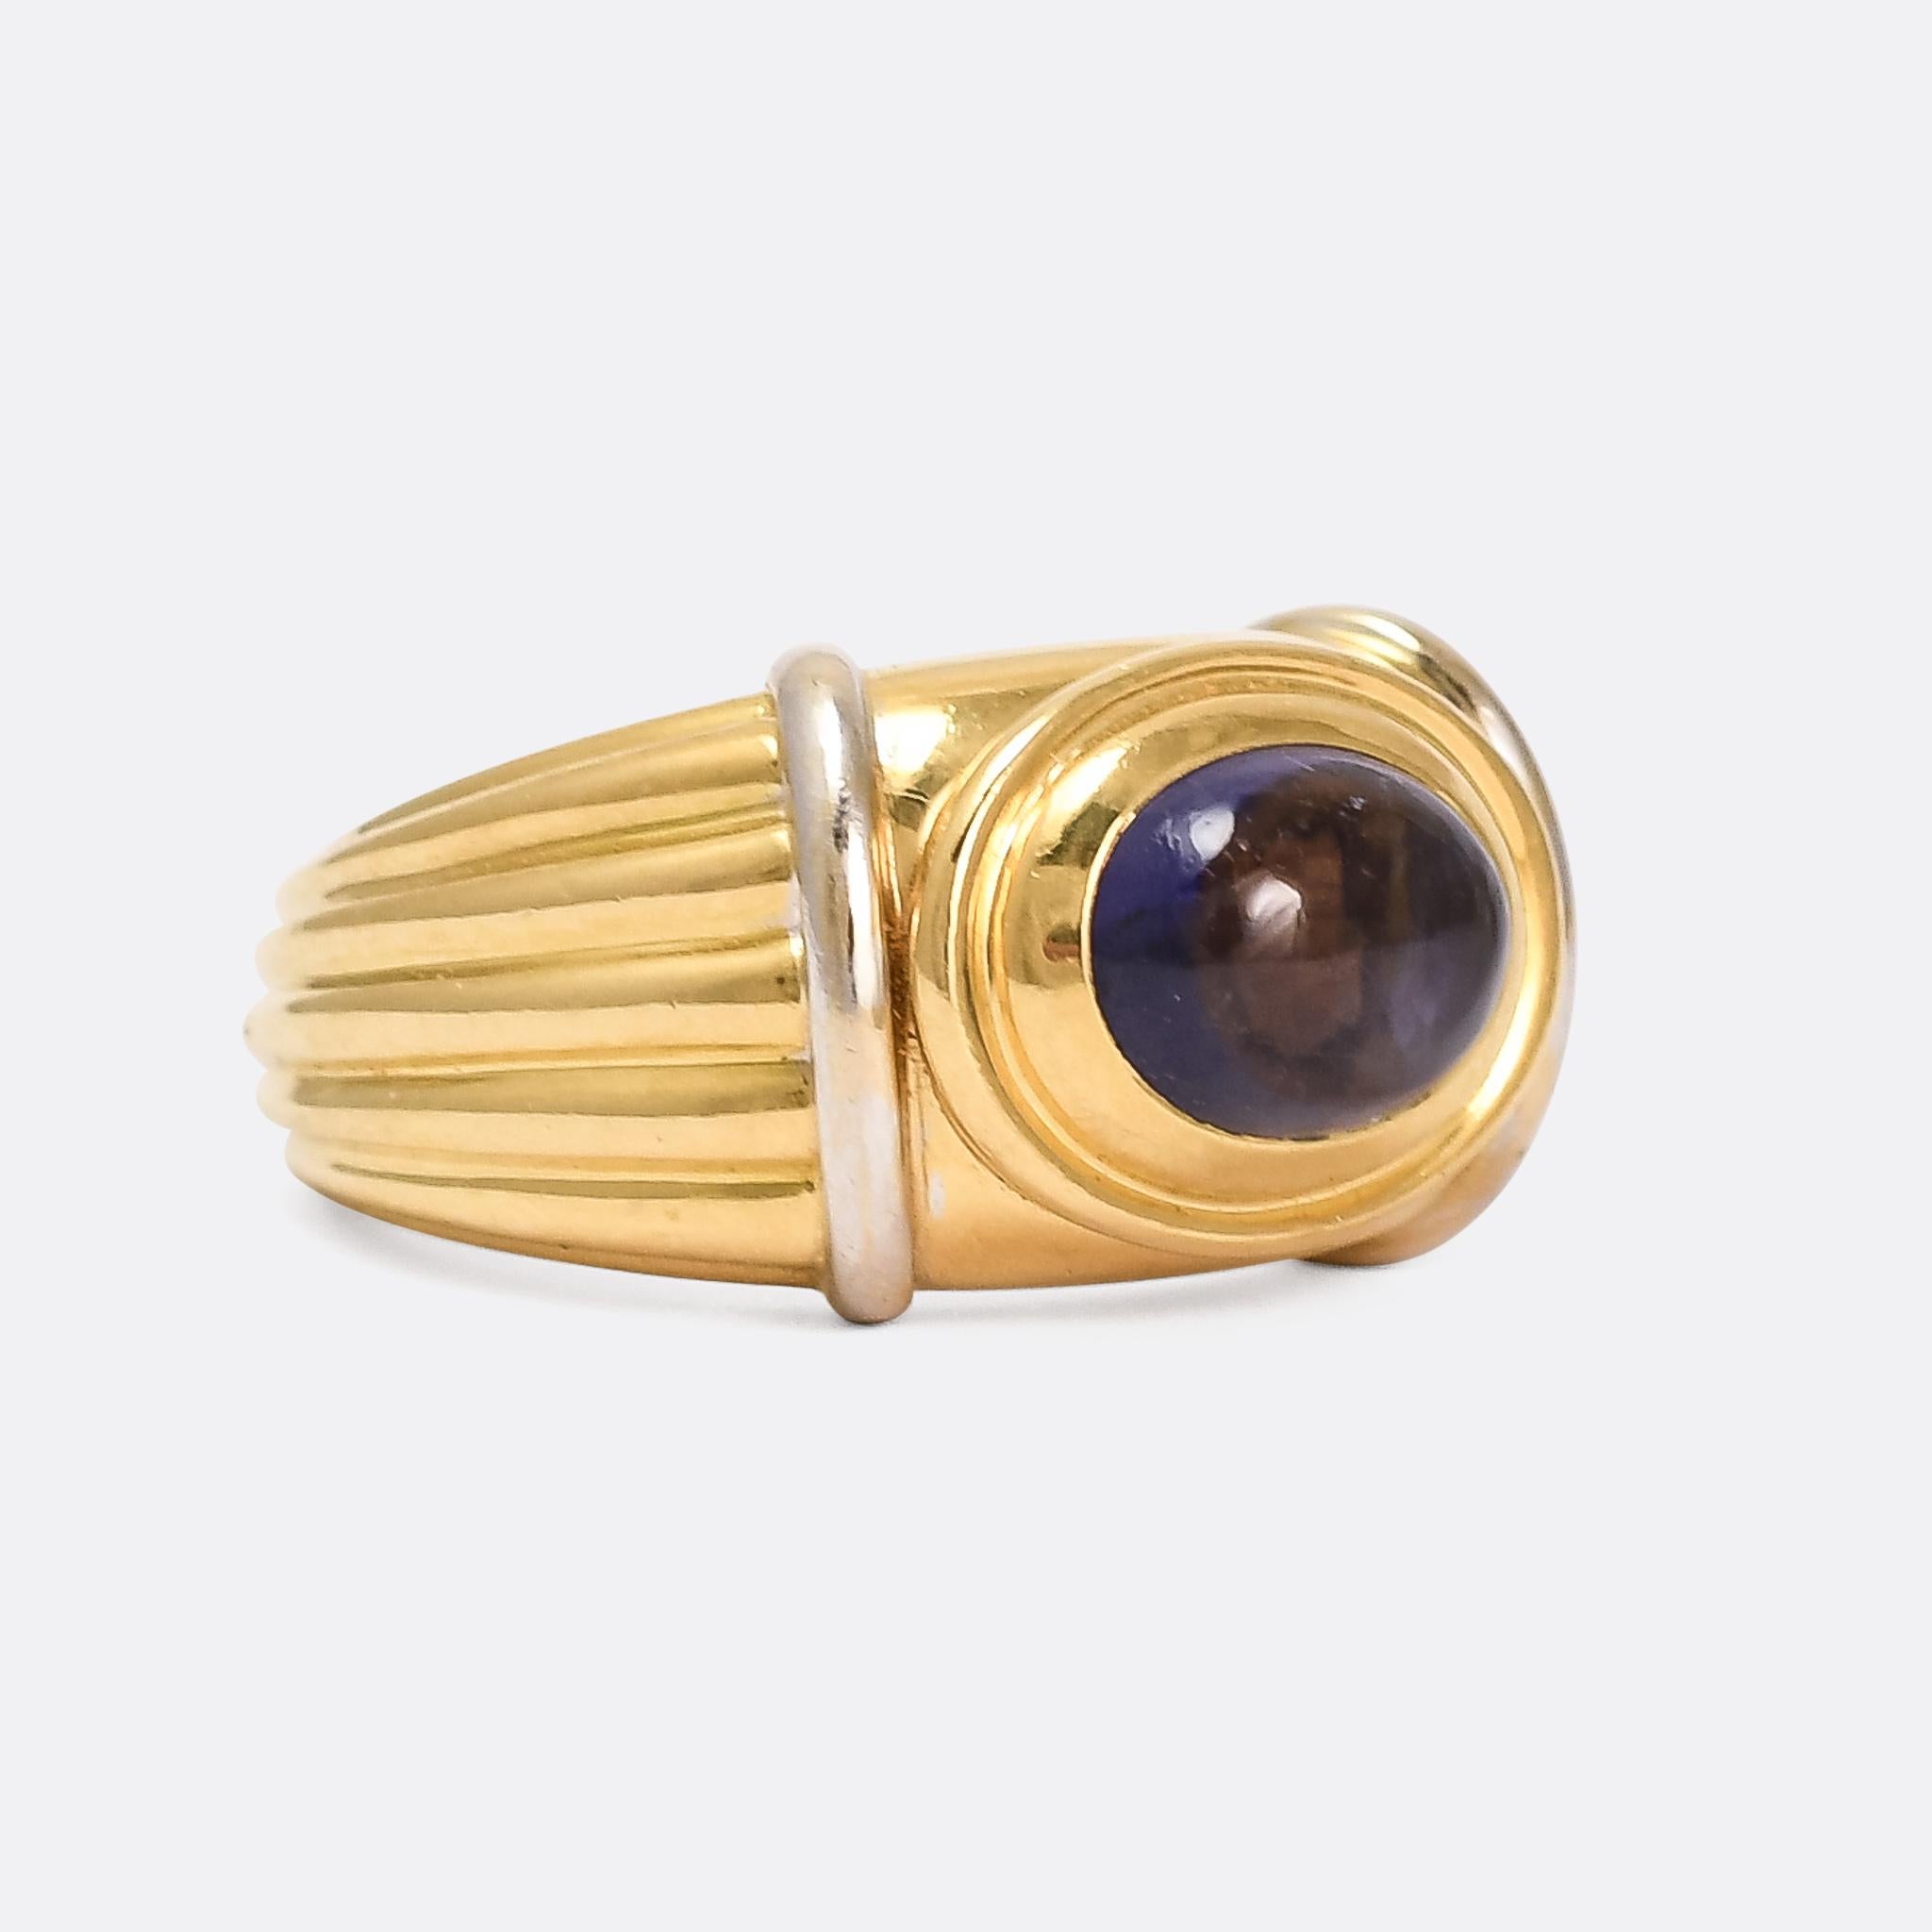 A gorgeous vintage Boucheron ring from their iconic 1980s 